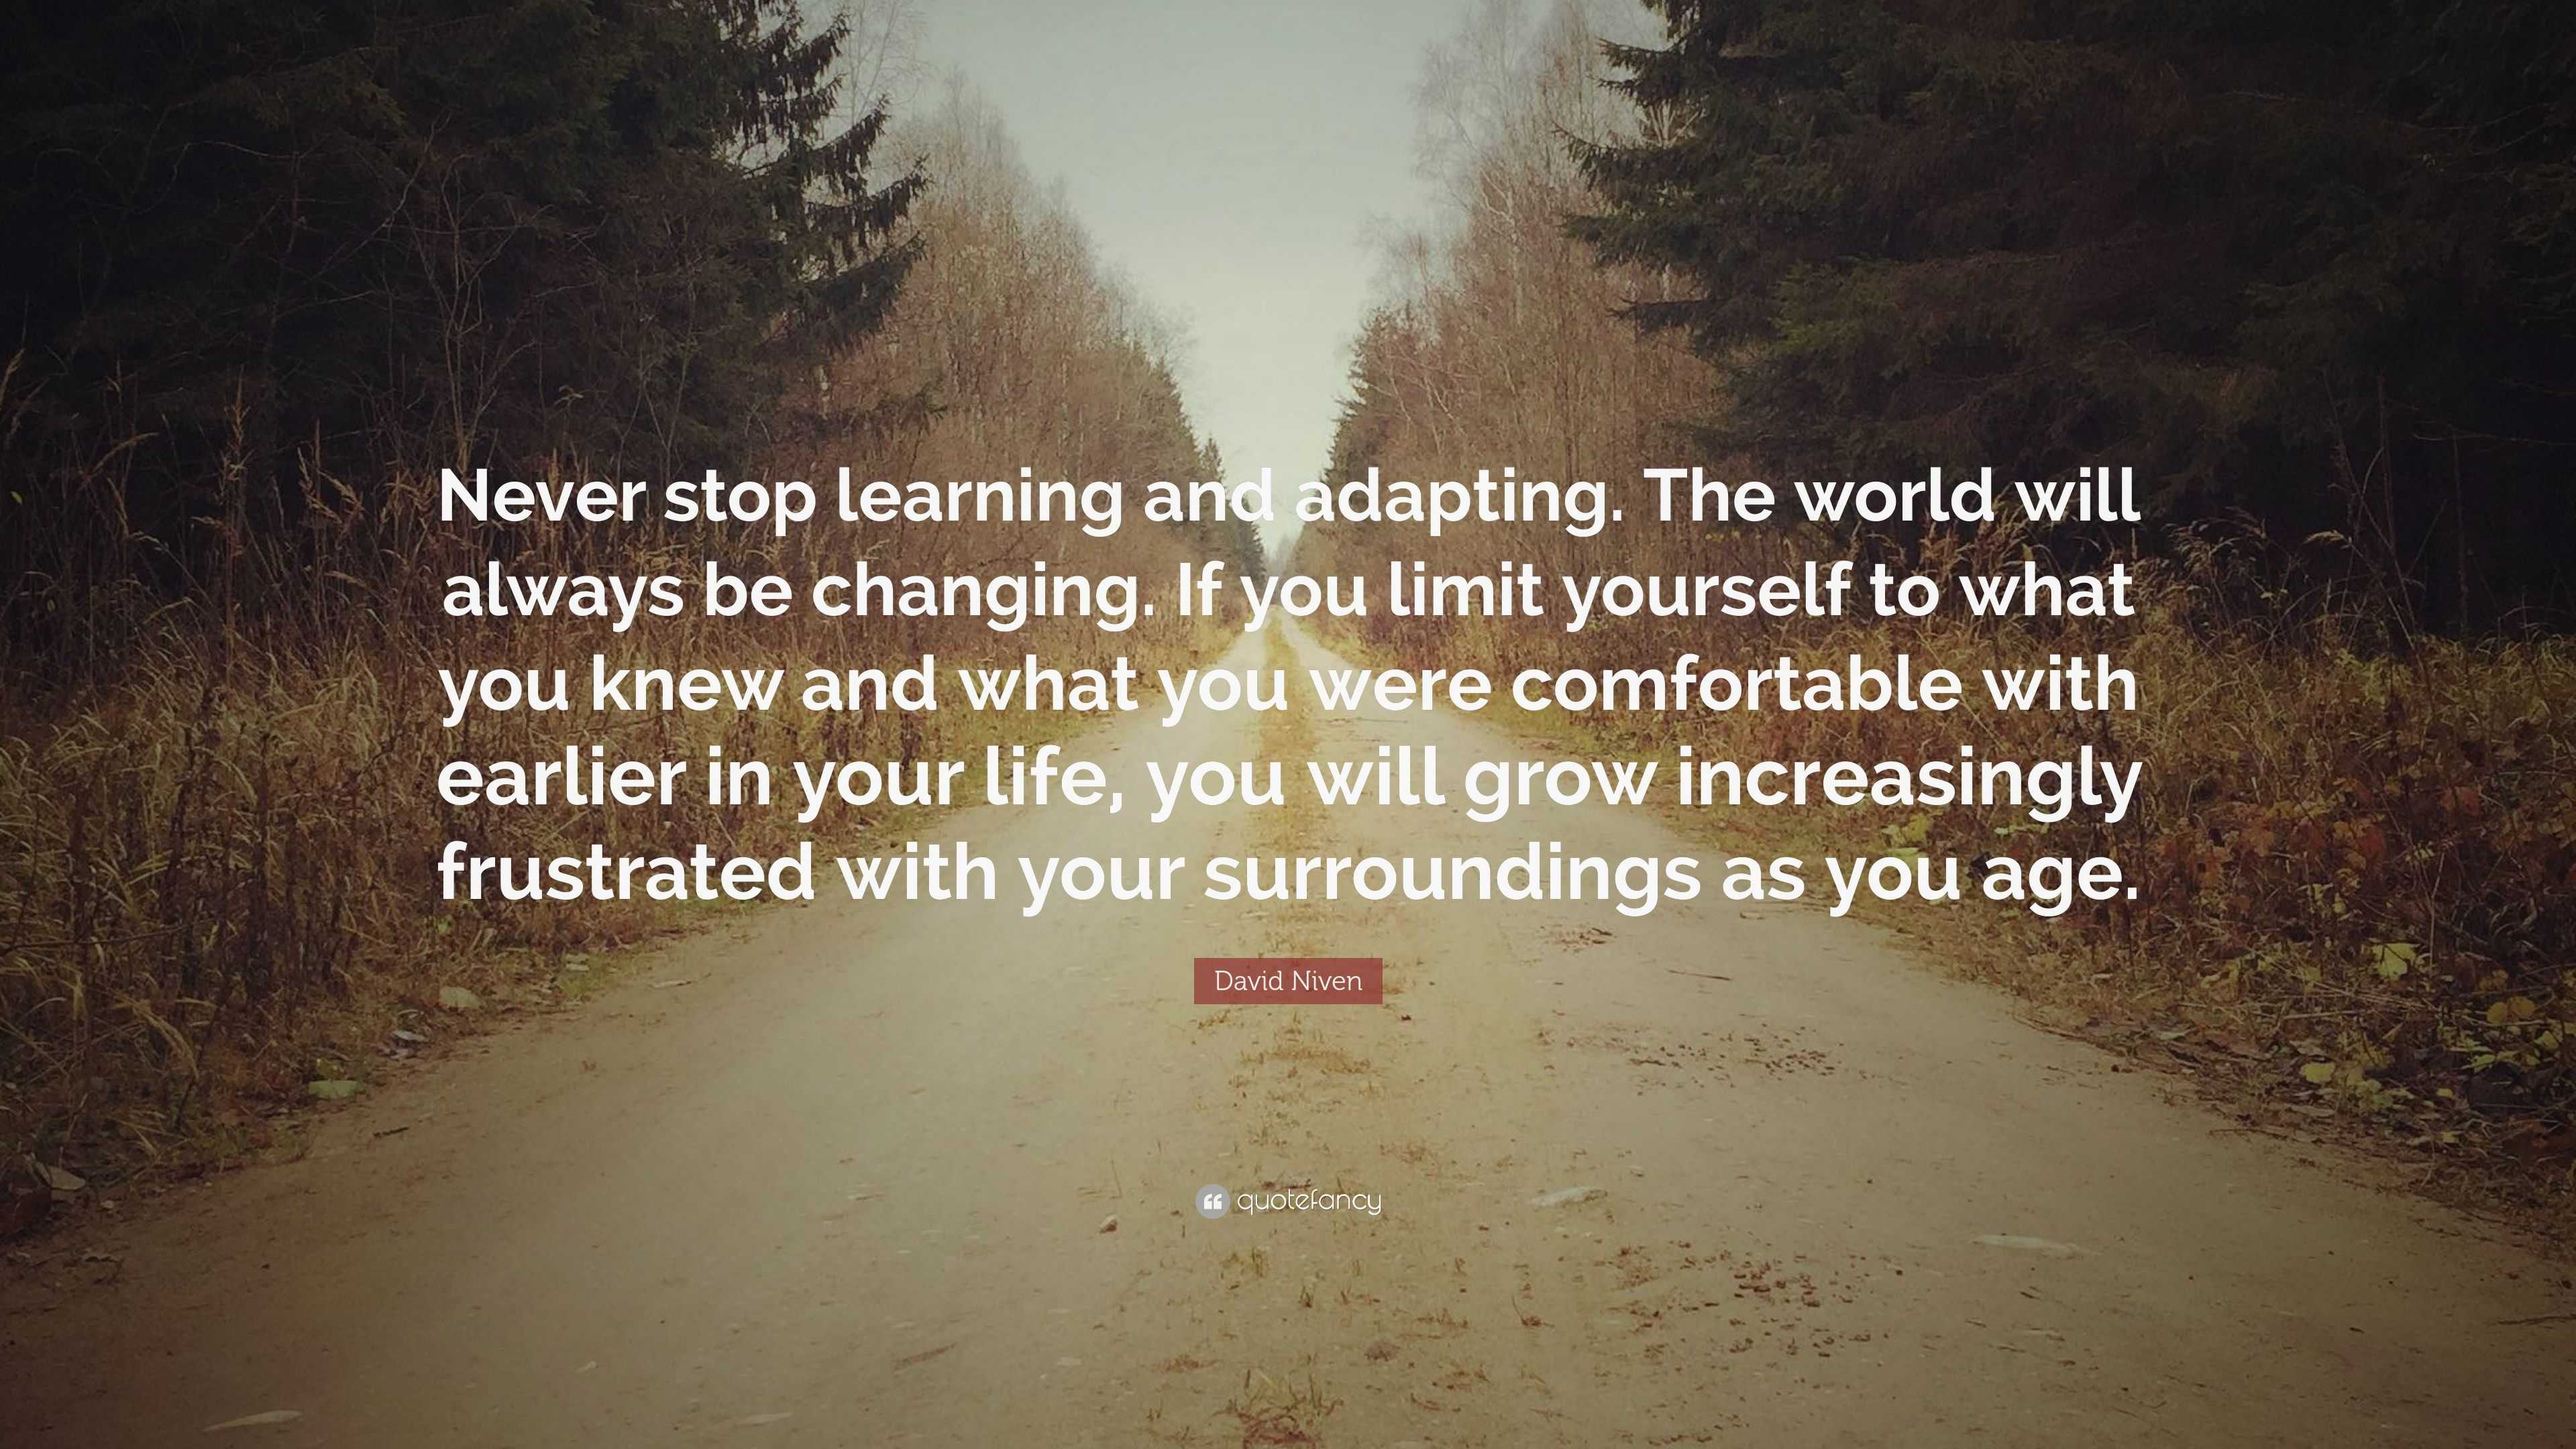 David Niven Quote: "Never stop learning and adapting. The ...